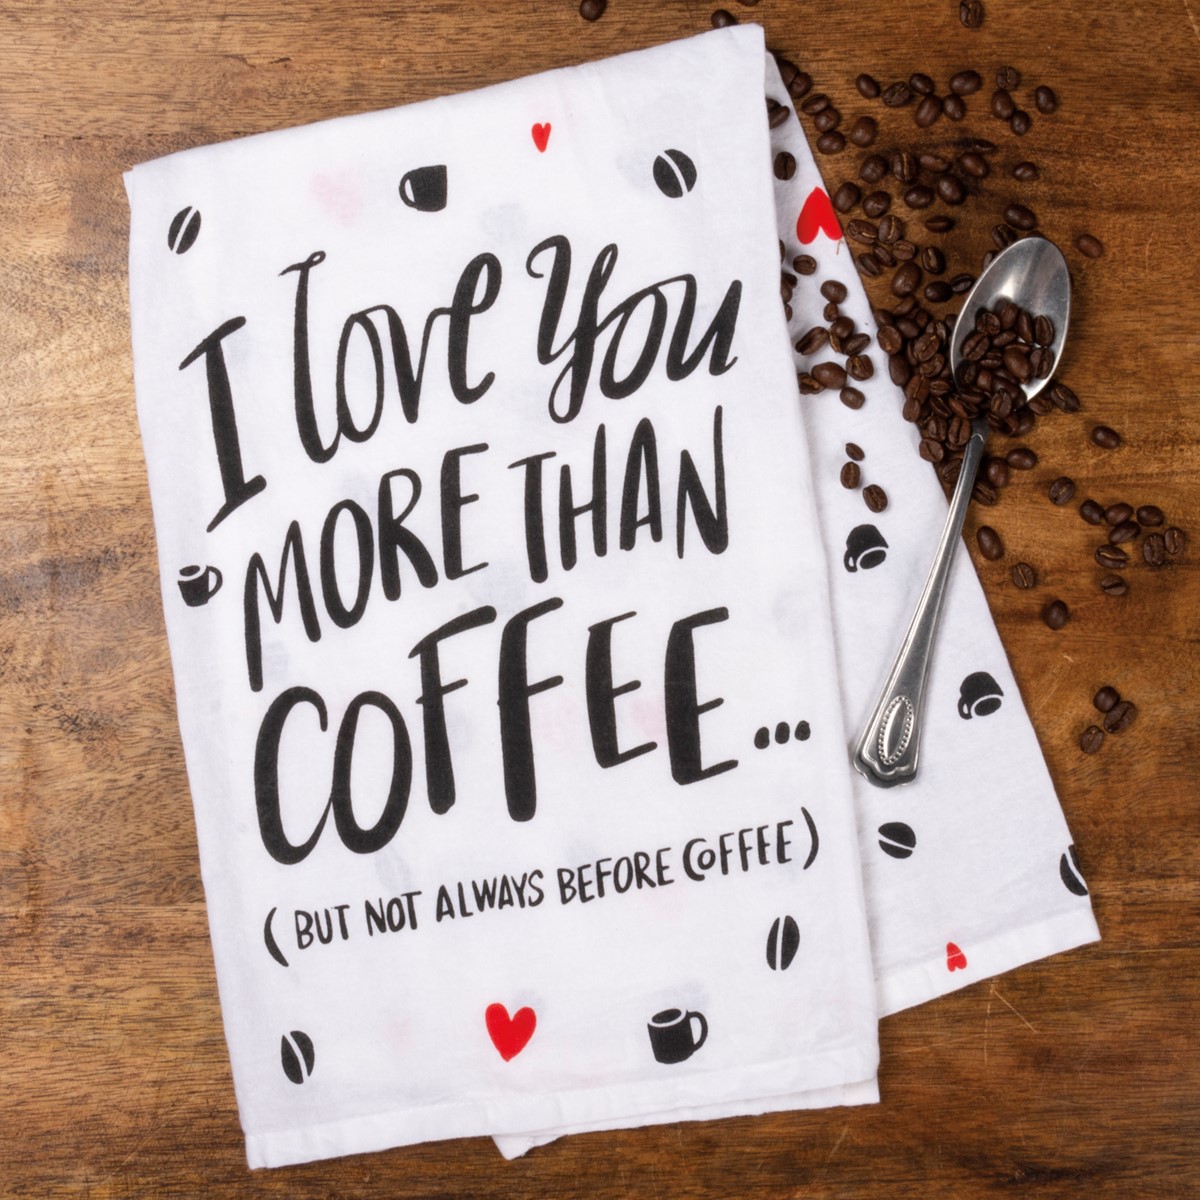 But Not Always Before Coffee Kitchen Towel - Cotton